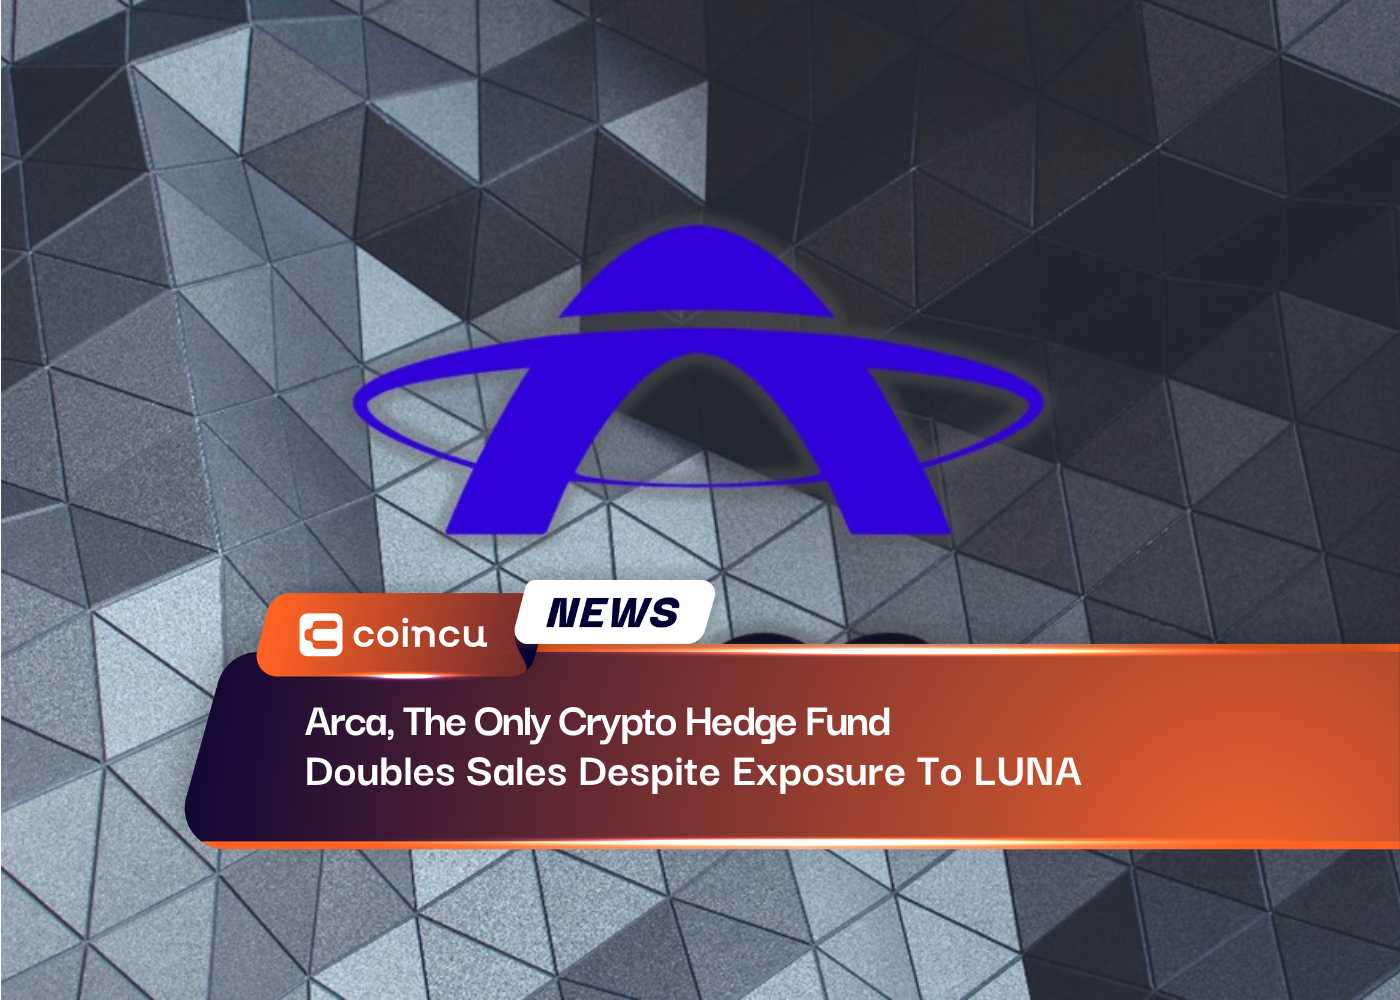 Arca, The Only Crypto Hedge Fund Doubles Sales Despite Exposure To LUNA